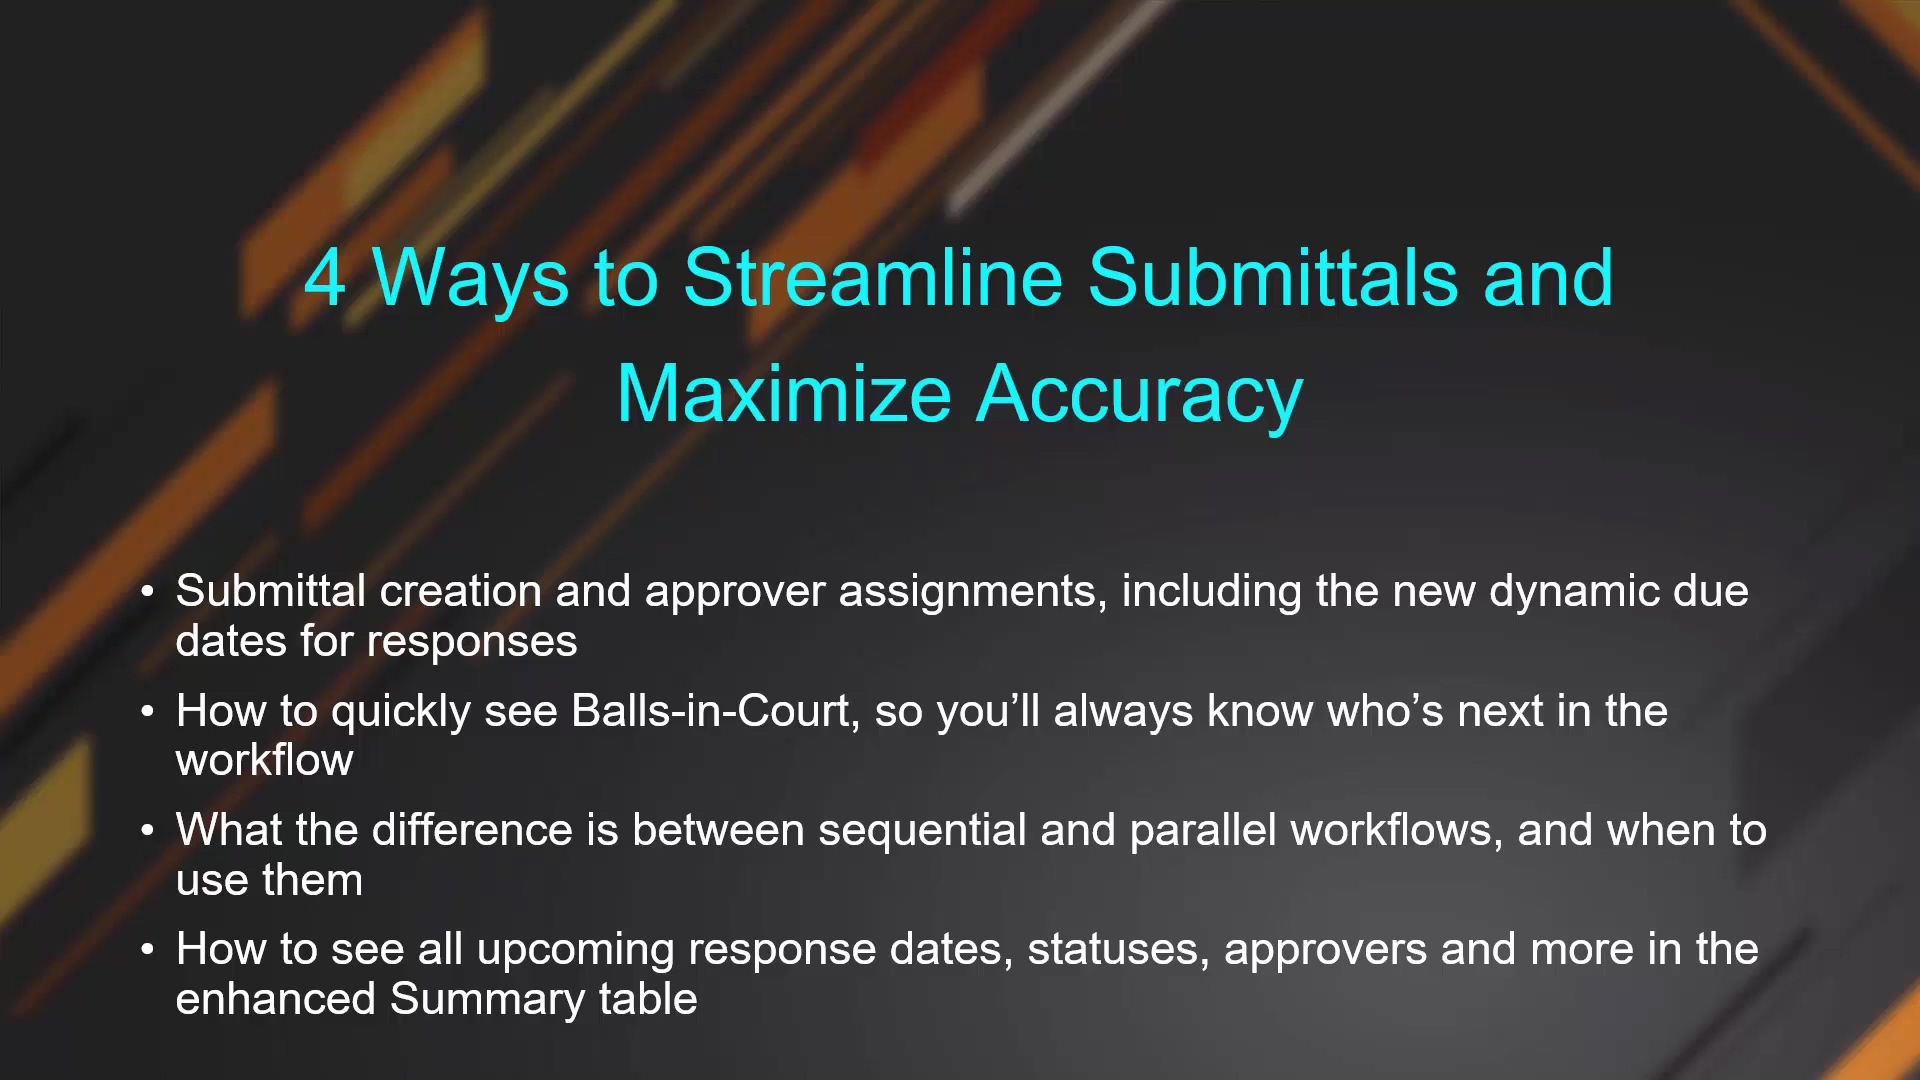 4 Ways to Streamline Submittals and Maximize Accuracy